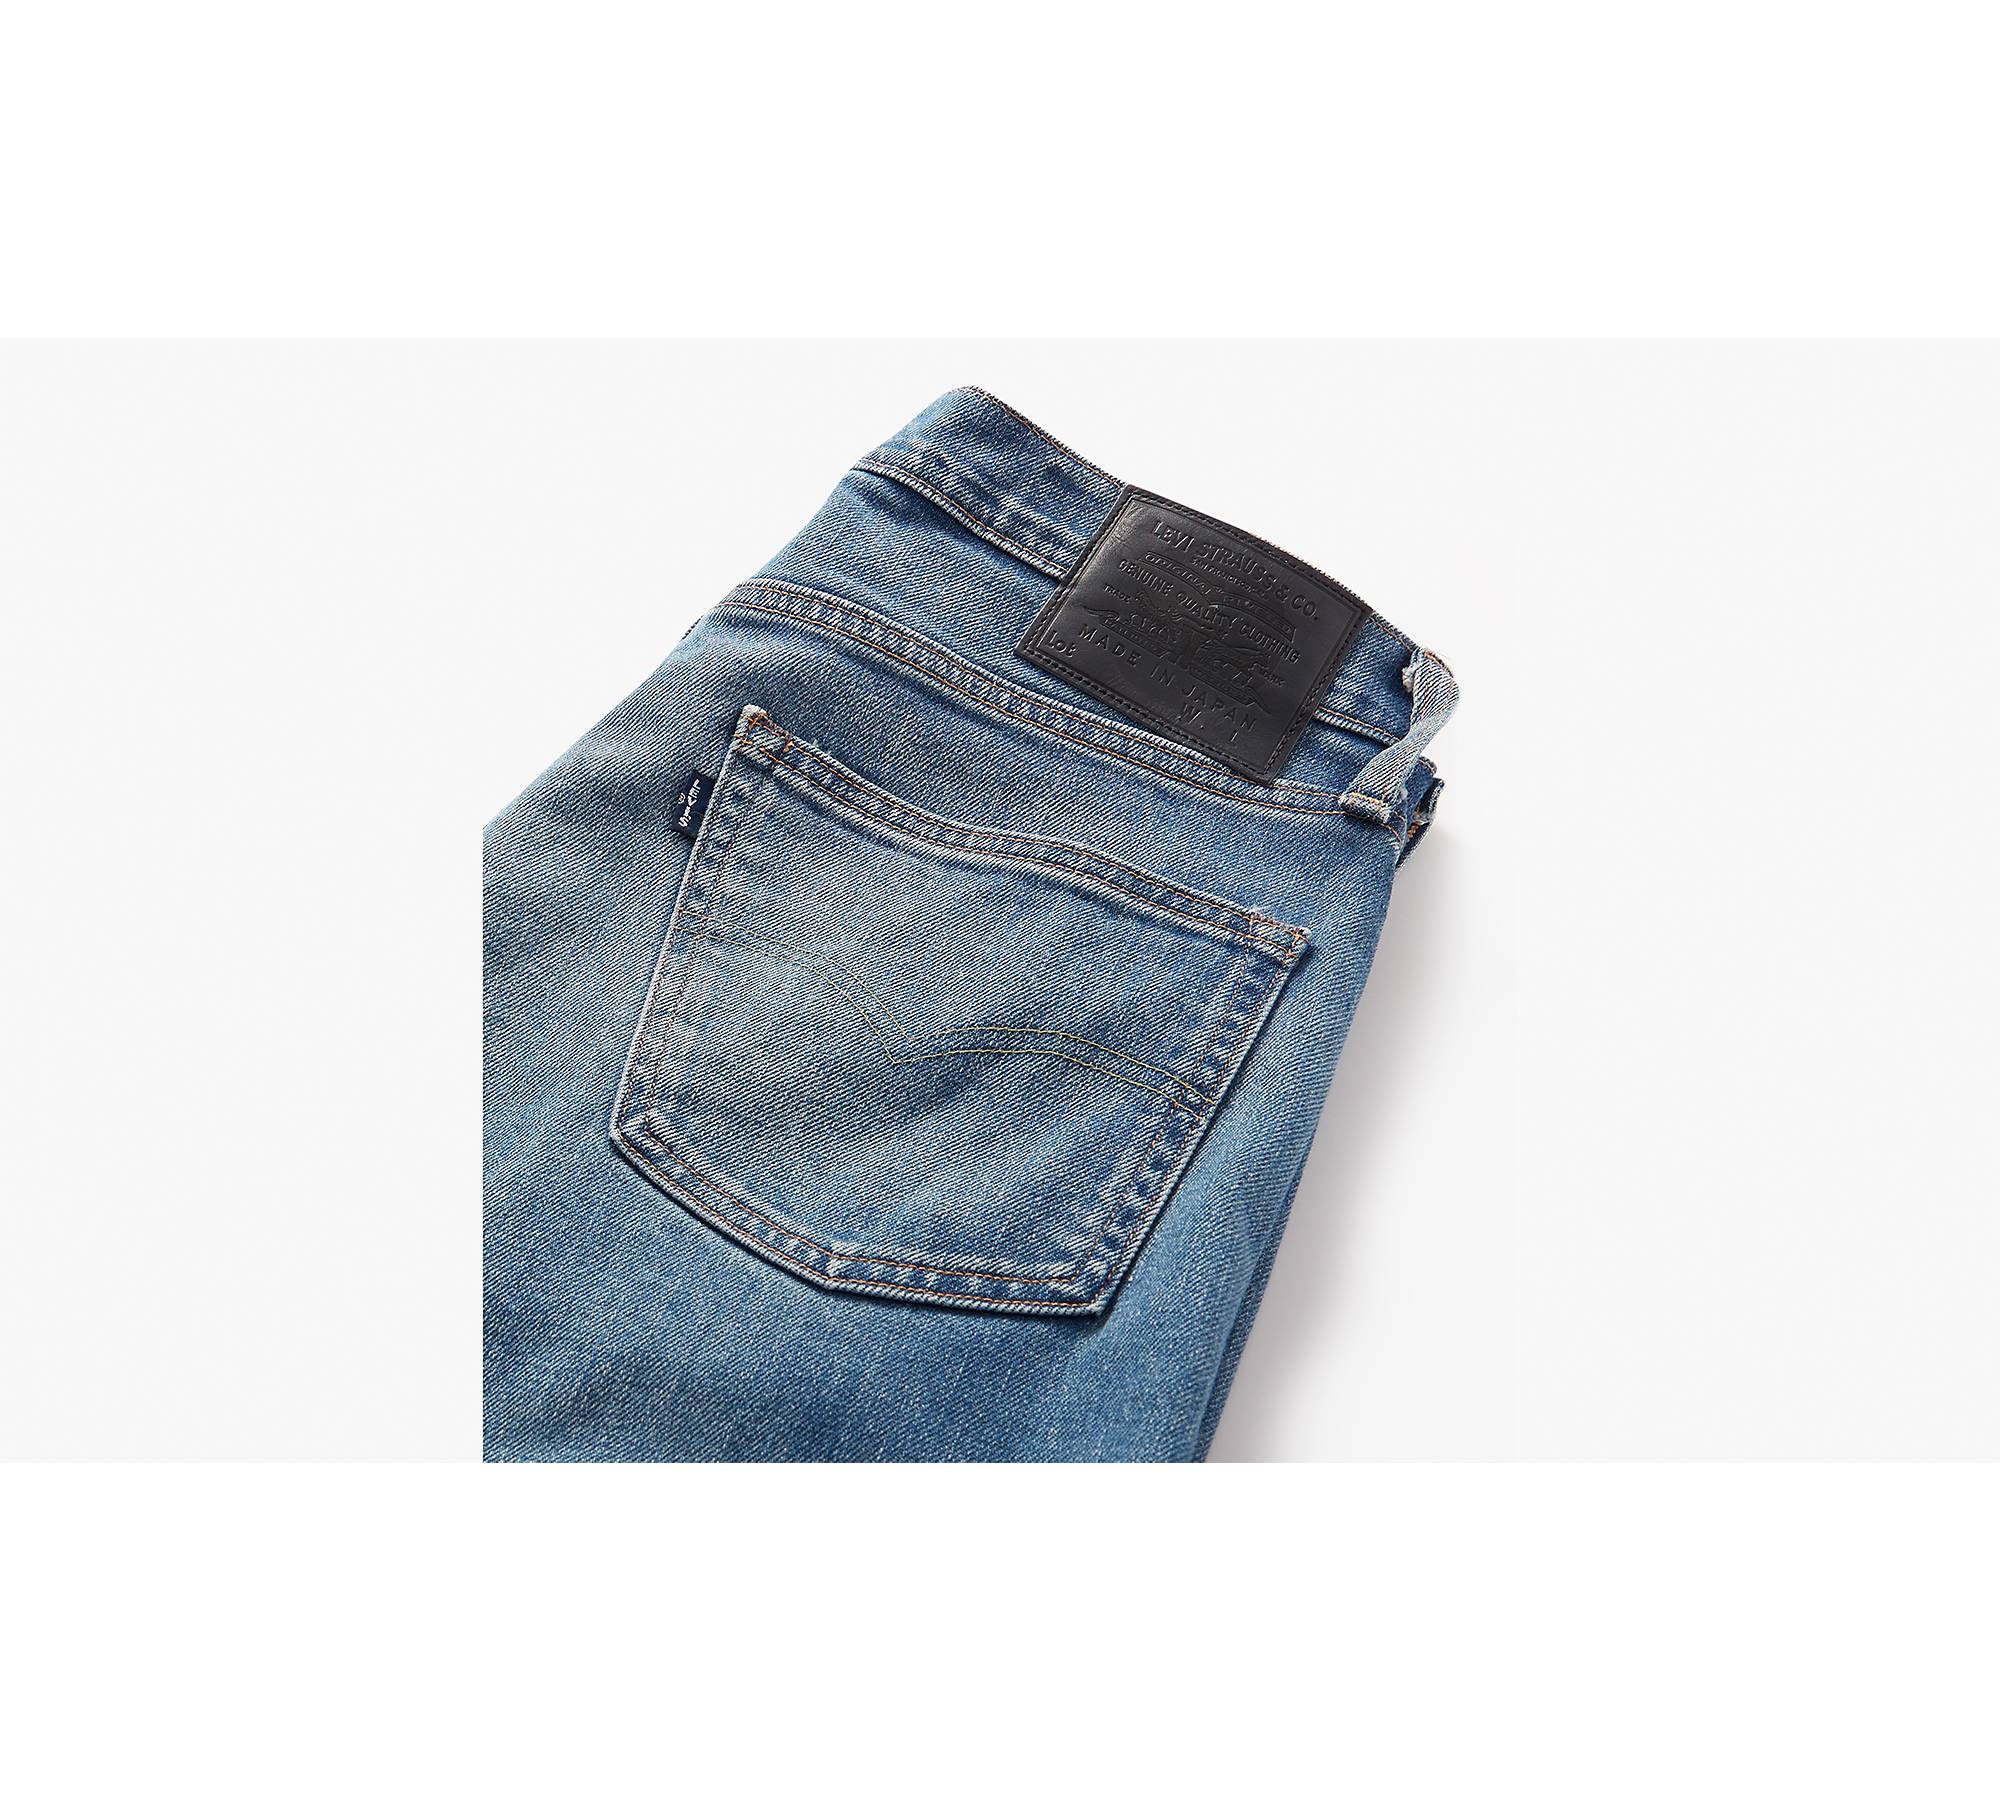 Levi's® Made In Japan 511™ Slim Jeans - Blue | Levi's® FI